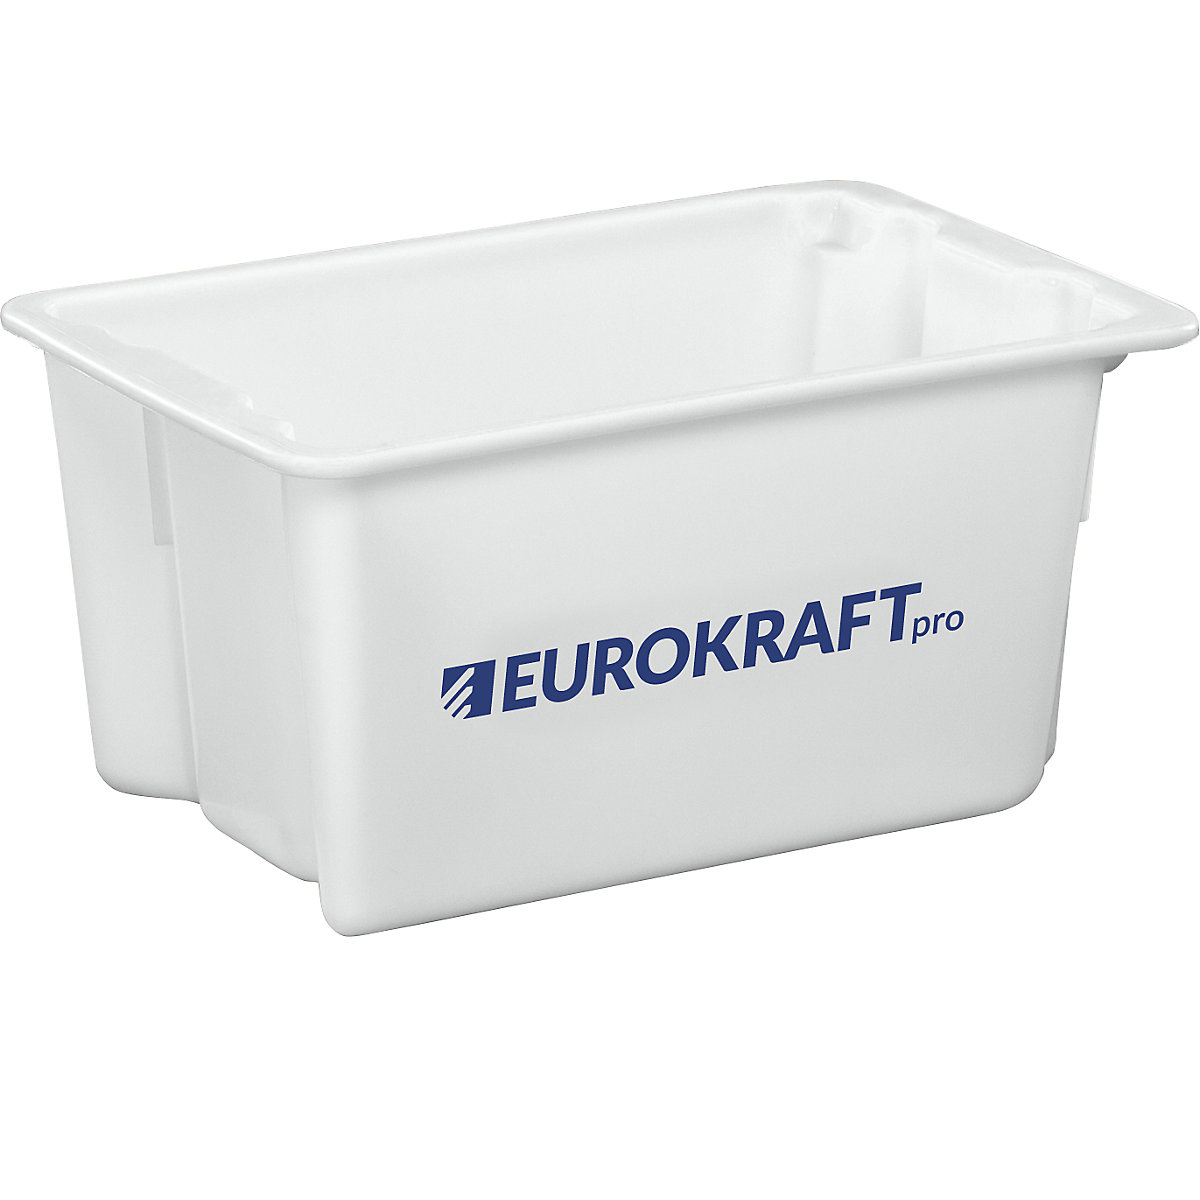 EUROKRAFTpro – Stack/nest container made of polypropylene suitable for foodstuffs, 50 l capacity, pack of 3, solid walls and base, natural colour